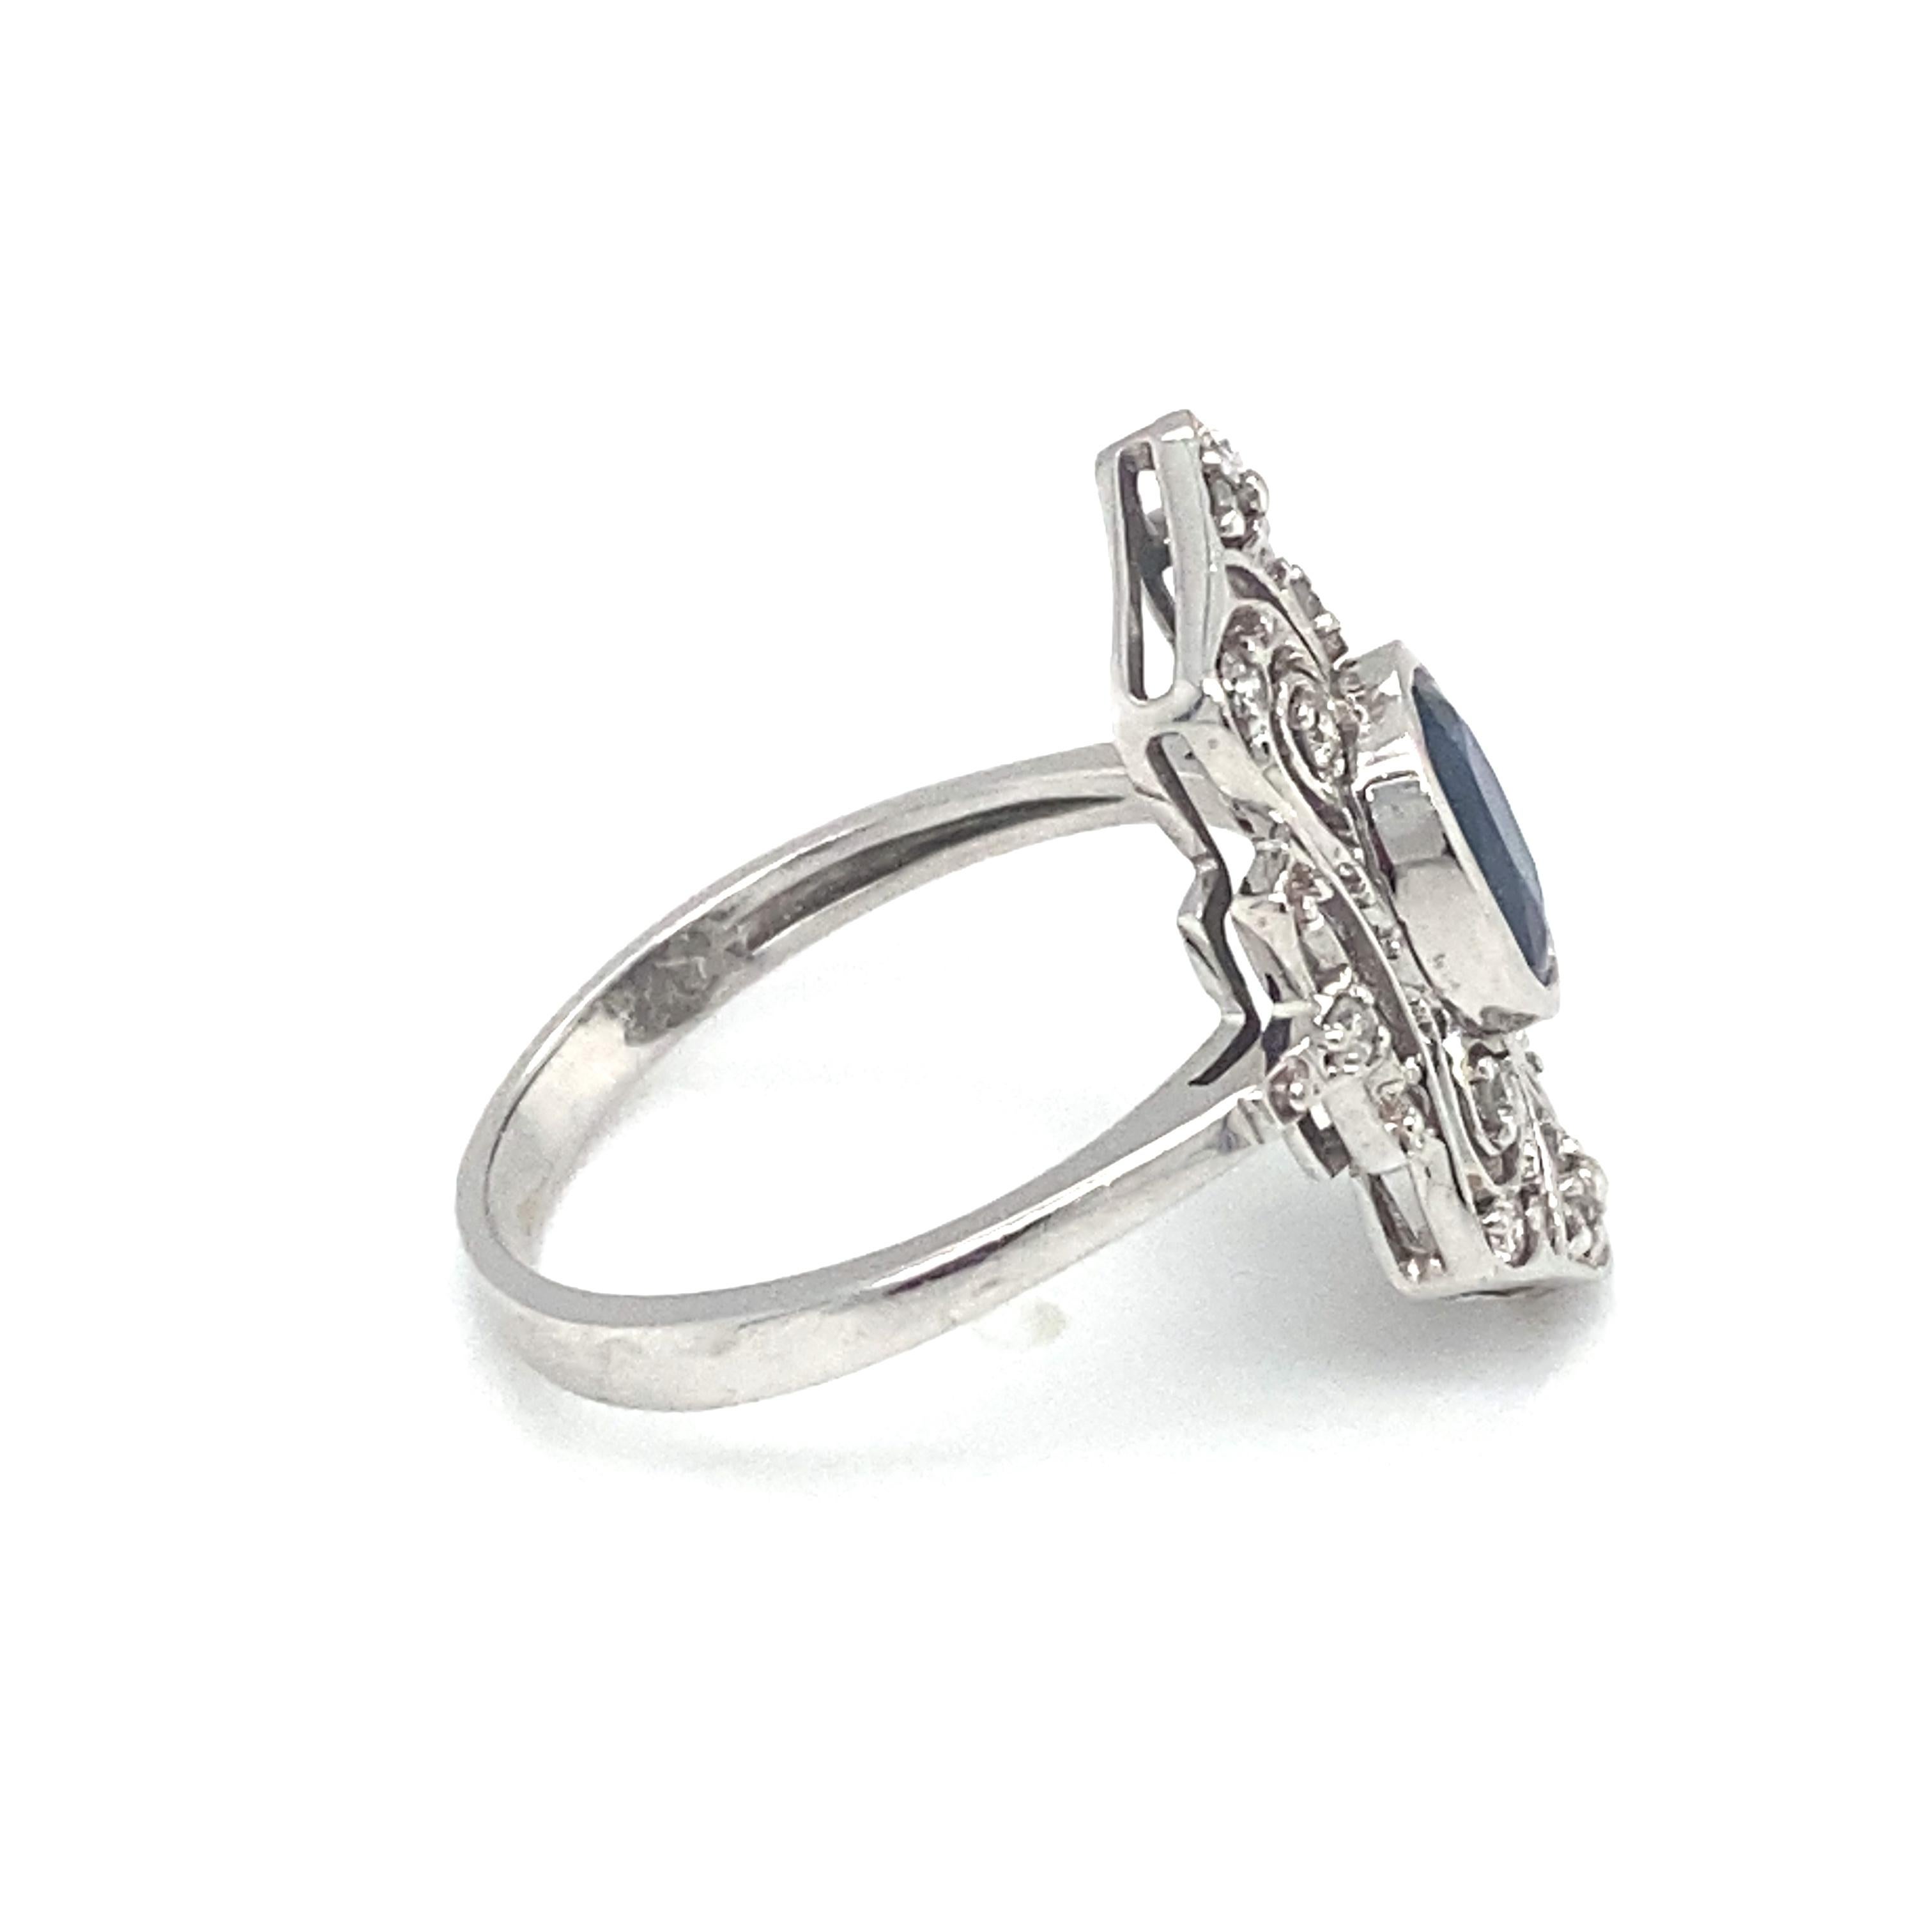 Women's or Men's Circa 1950s Art Deco Style Sapphire and Diamond Cocktail Ring in 14K White Gold For Sale